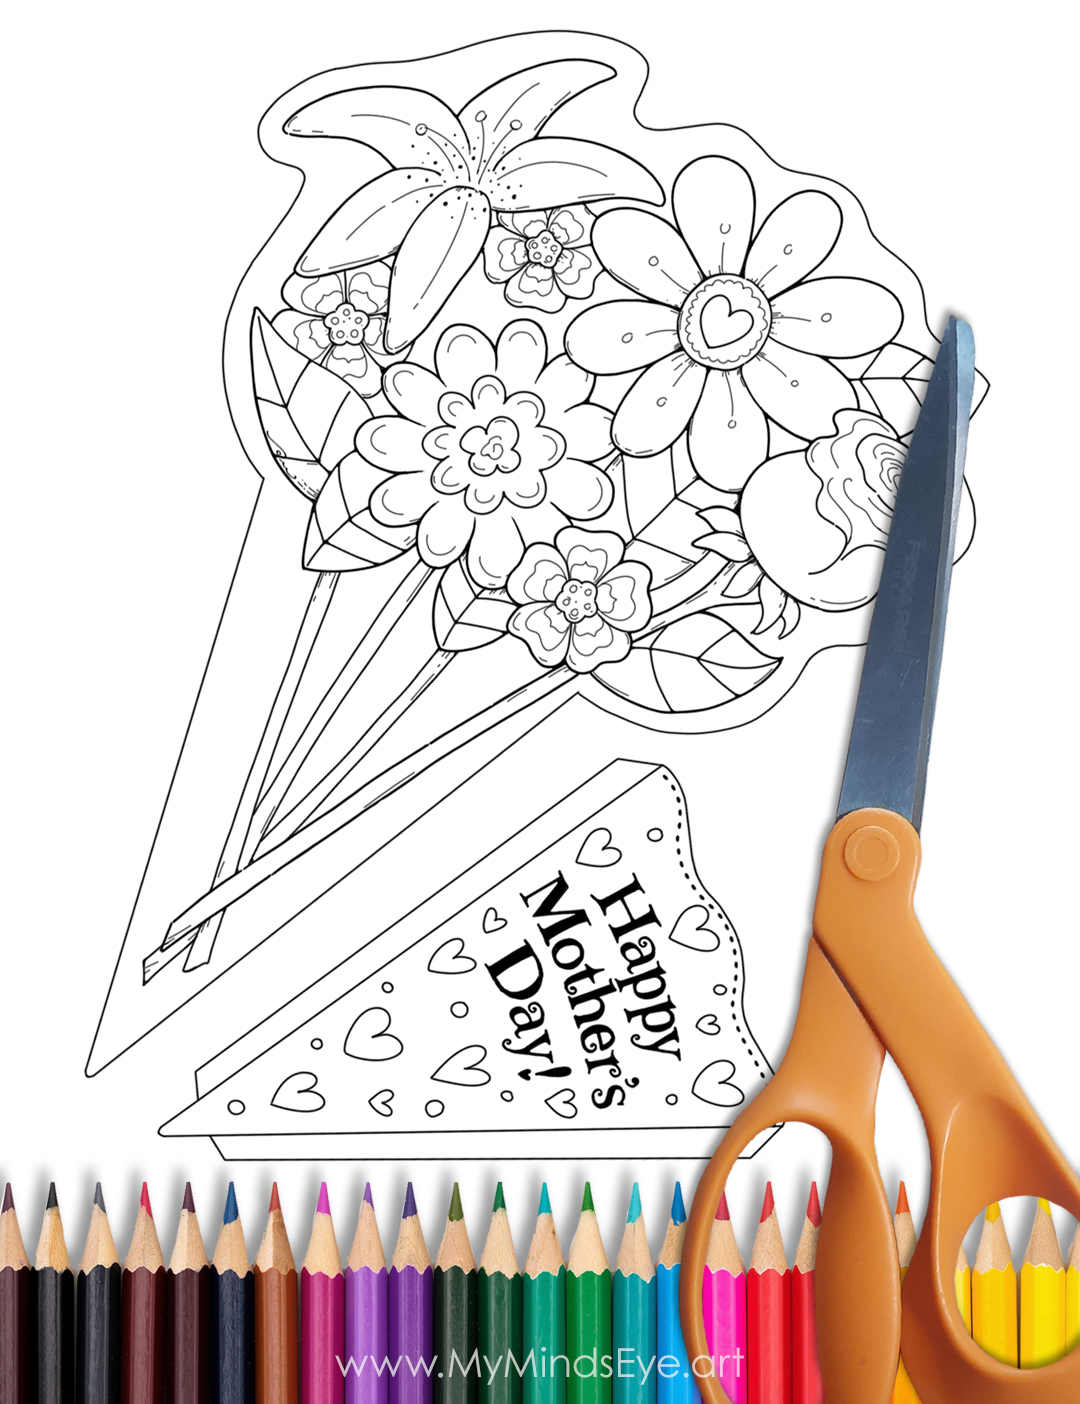 Image of a mother's day flower bouquet coloring page. The image is uncolored.